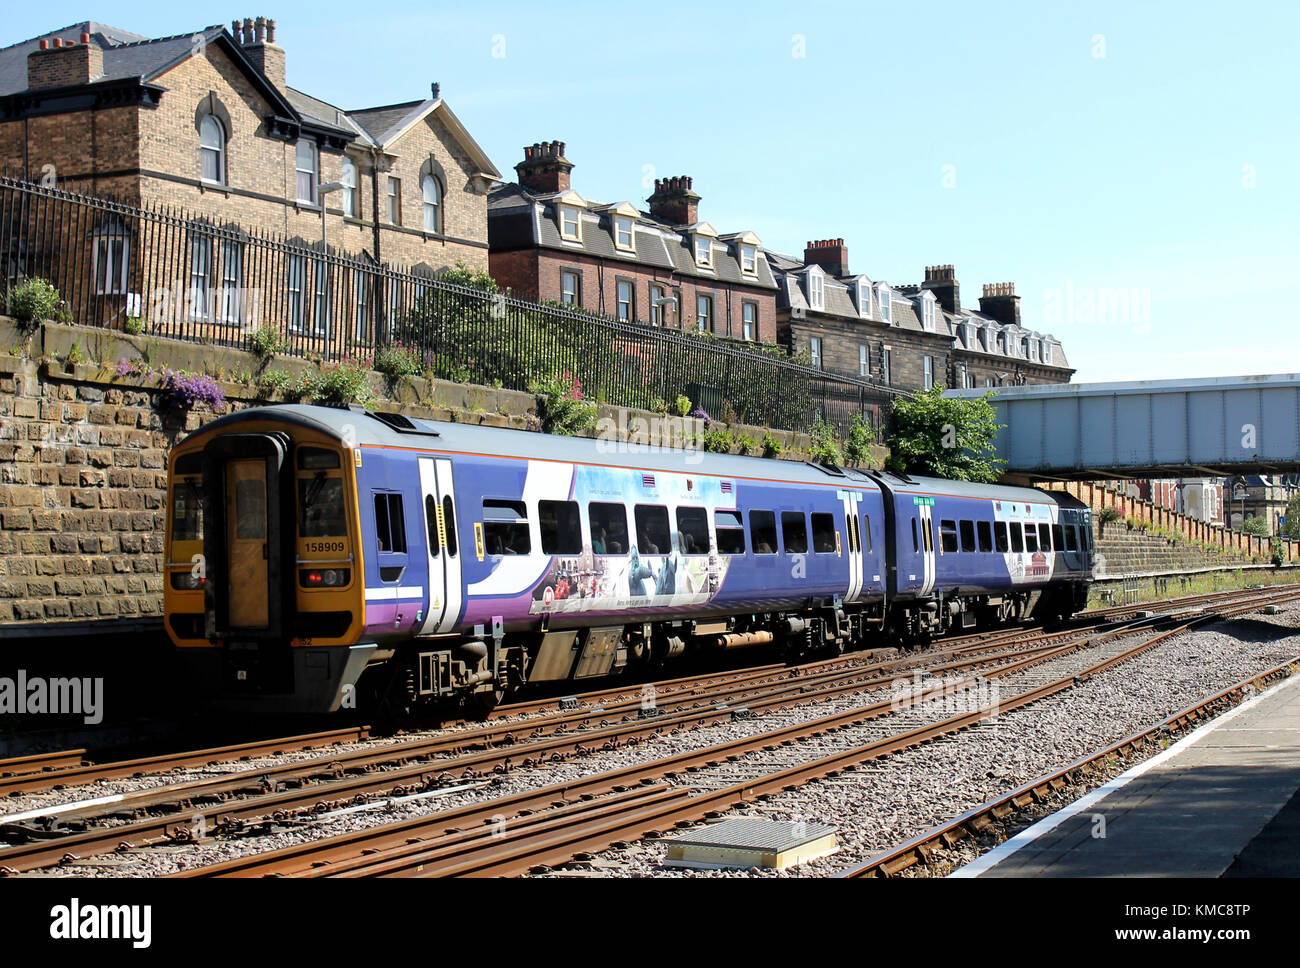 SCARBOROUGH, NORTH YORKSHIRE, ENGLAND - 19th of June 2017: Commuter training leaving Scarborough station on East Coast railway headed to York on the 1 Stock Photo